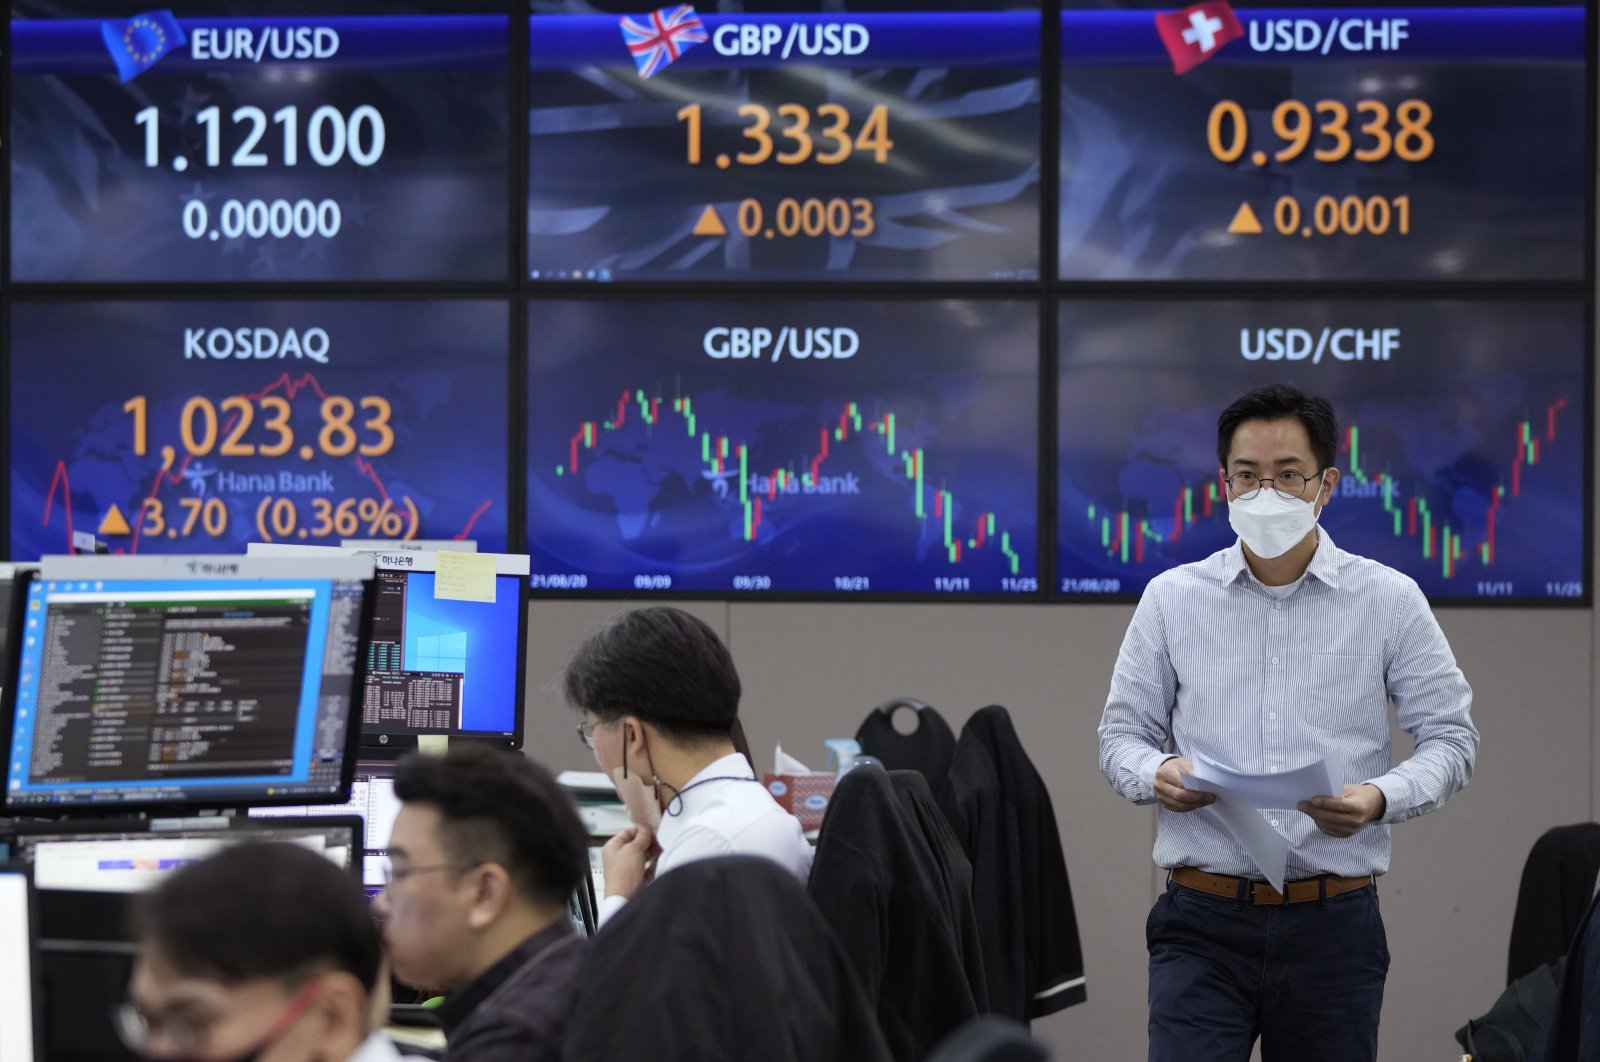 A currency trader walks by the screens showing the foreign exchange rates at the foreign exchange dealing room of the KEB Hana Bank headquarters in Seoul, South Korea, Nov. 25, 2021. (AP Photo)